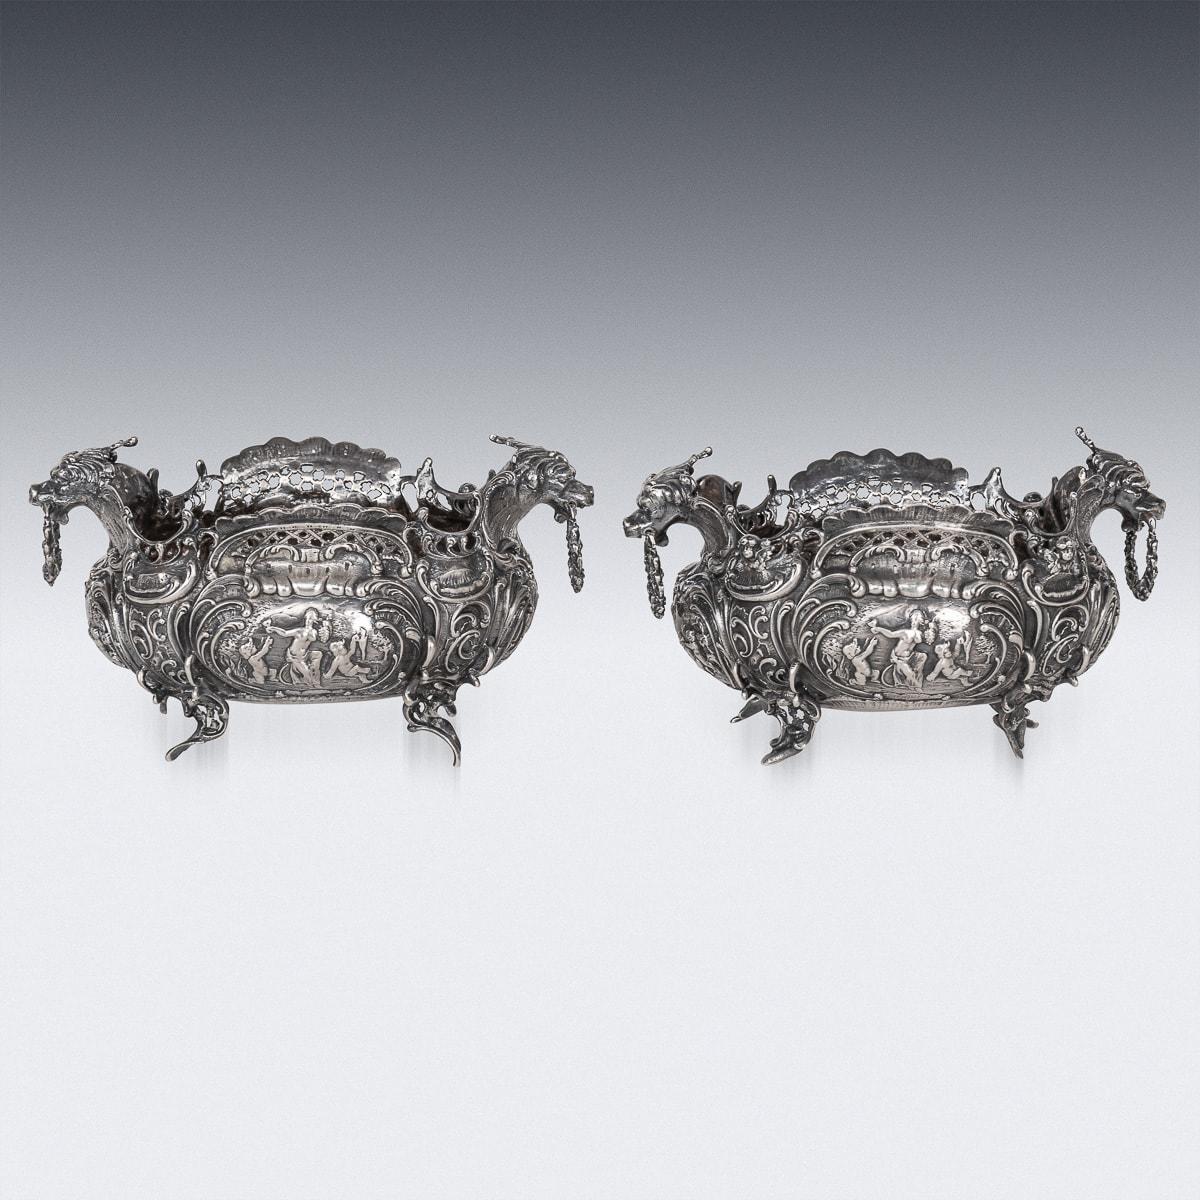 Antique 19th Century German Solid Silver Bowls, Georg Roth, Hanau c.1890 In Good Condition For Sale In Royal Tunbridge Wells, Kent